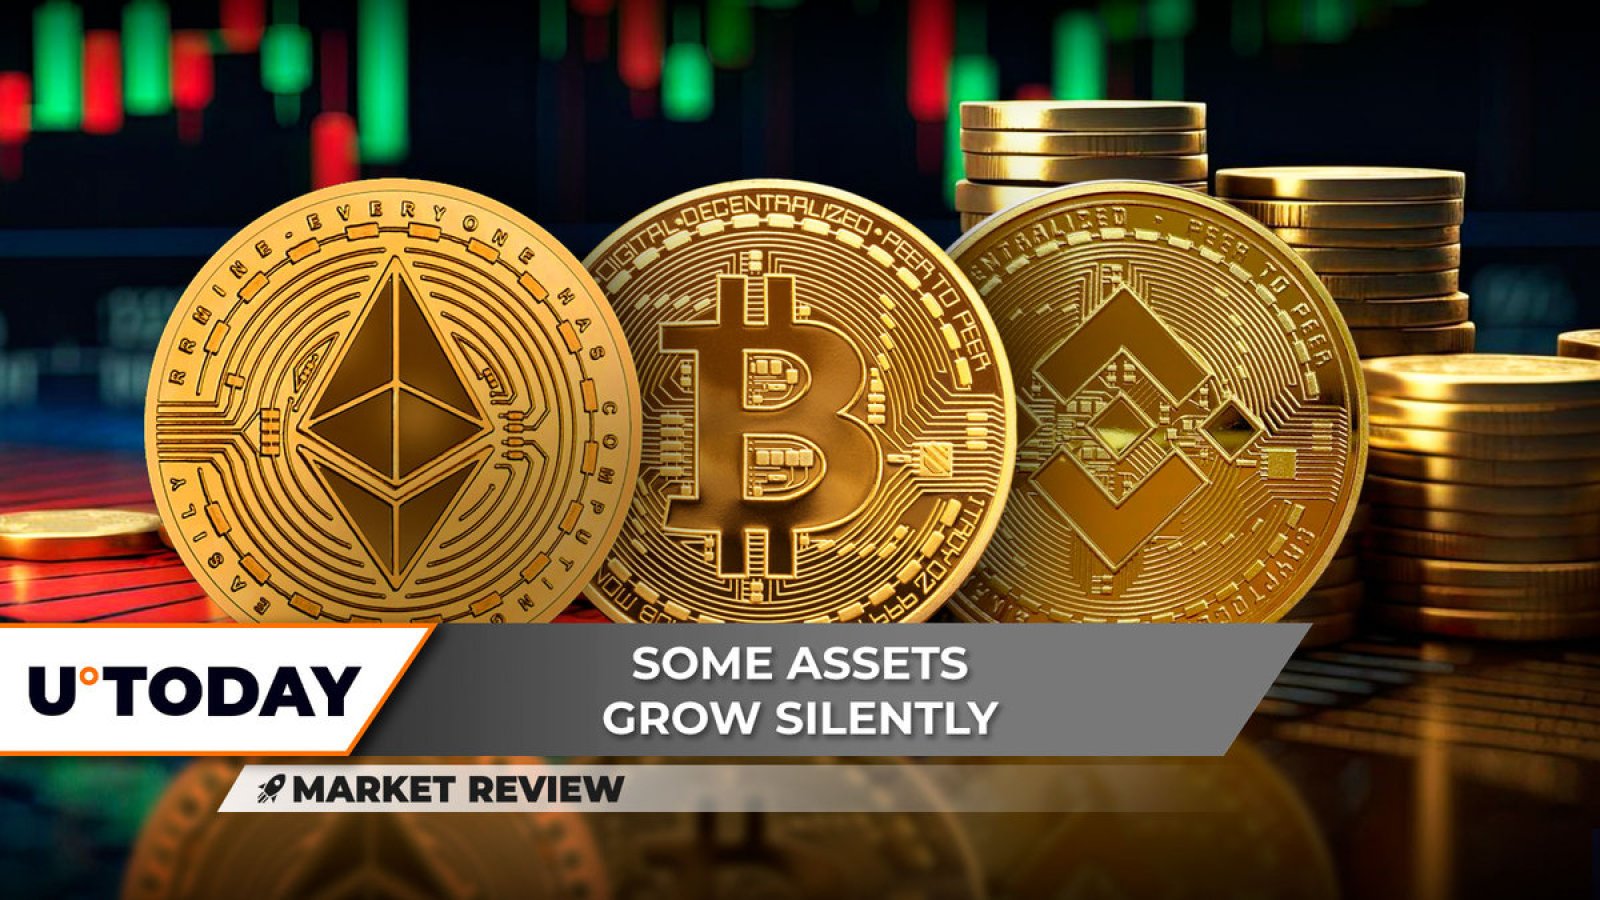 Why Isn't Ethereum Going to $5,000? Bitcoin's (BTC) $80,000 Attempt, Binance Coin's (BNB) Silent 40% Pump 